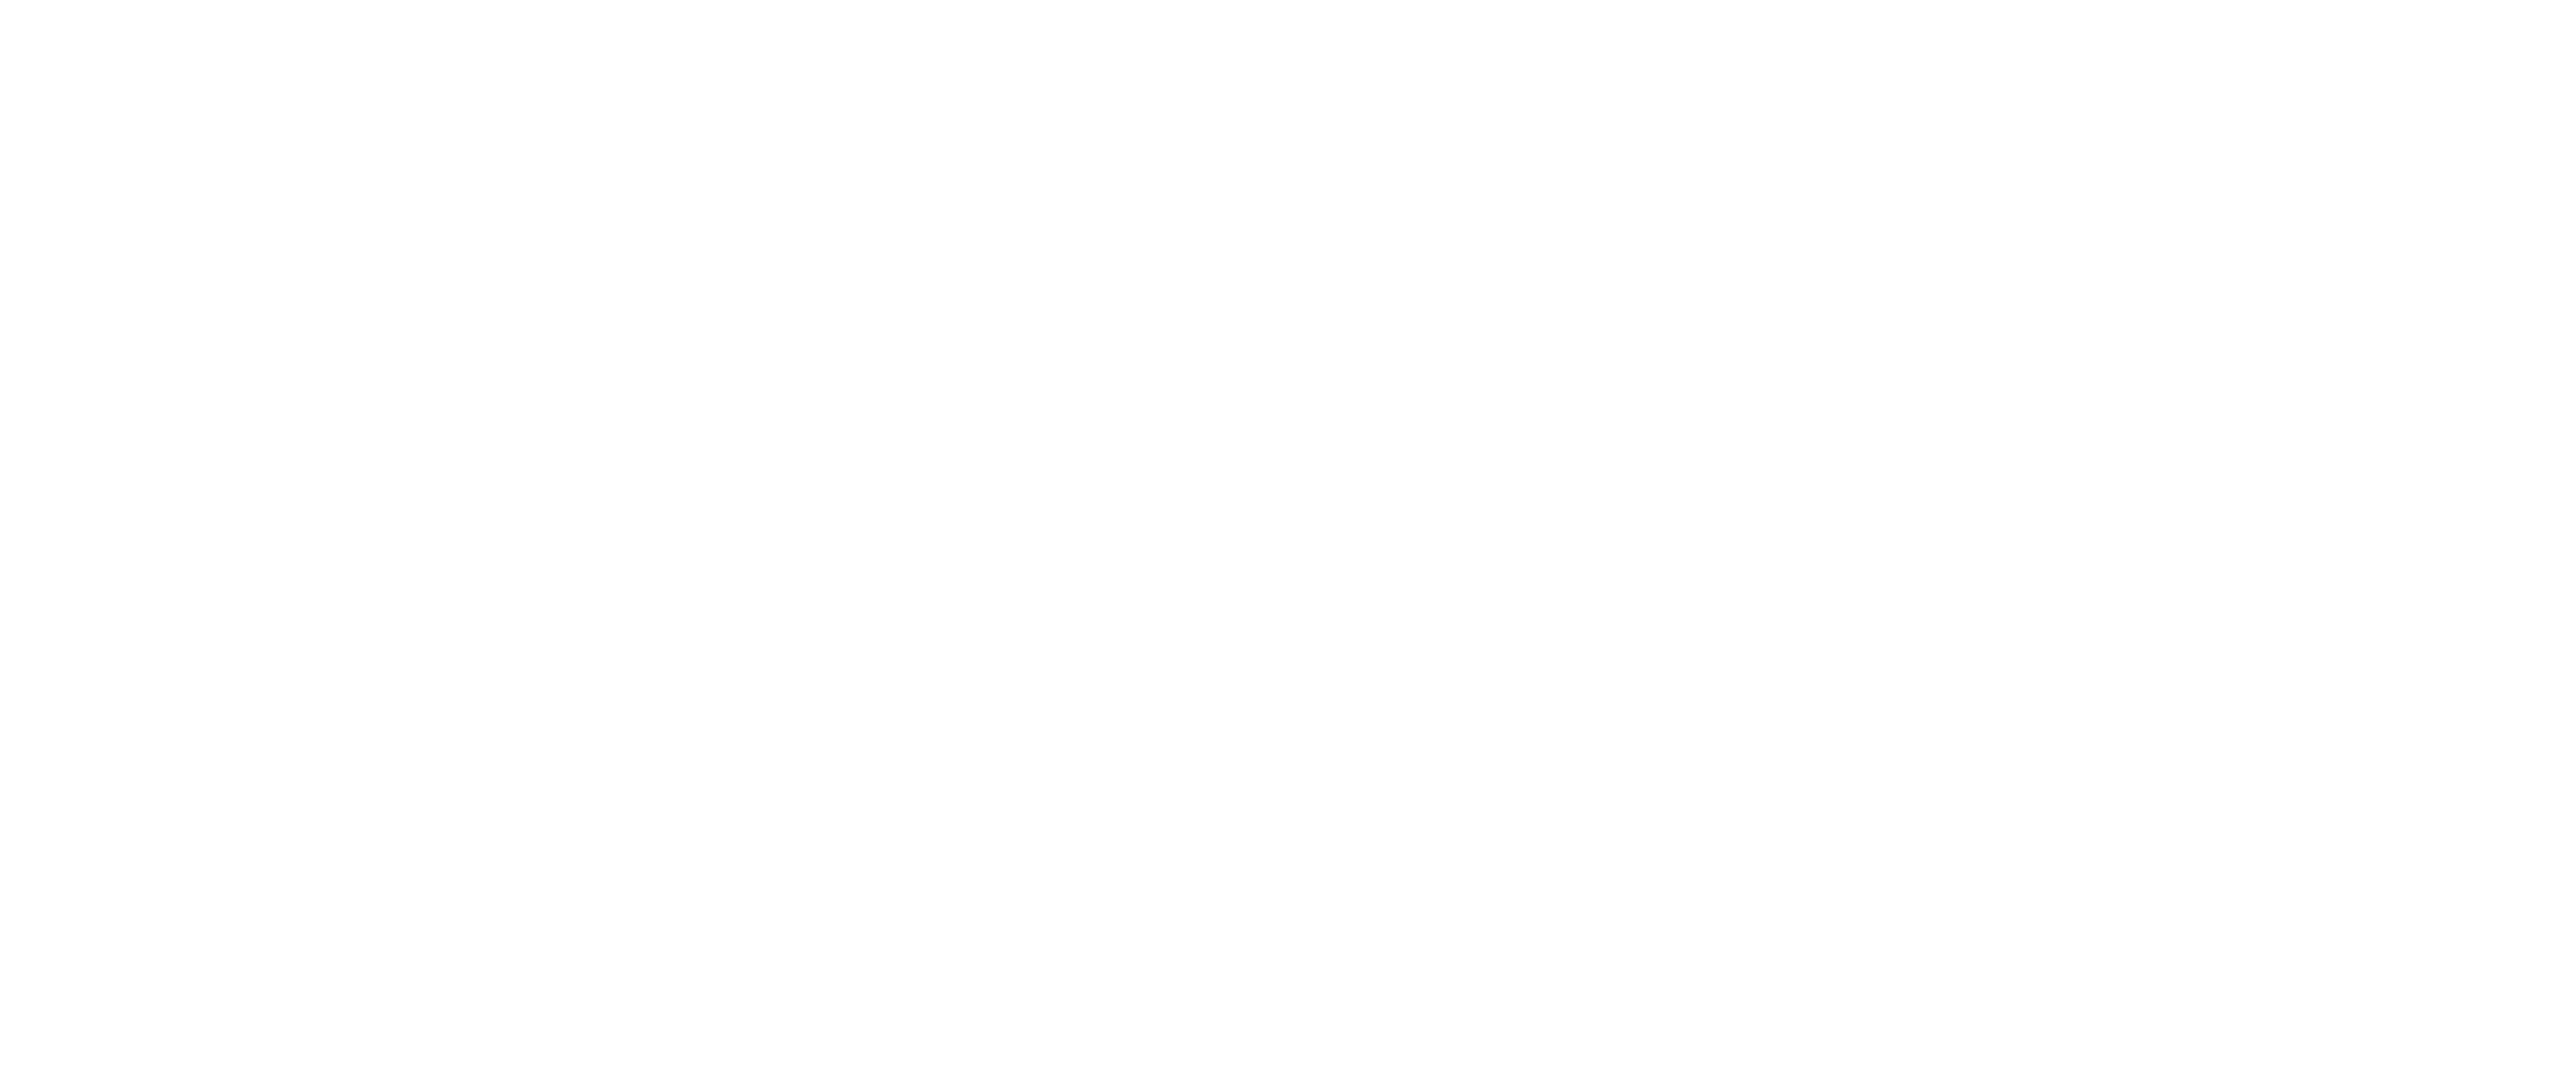 eThesis is an Complete Thesis Management Solution and Platform